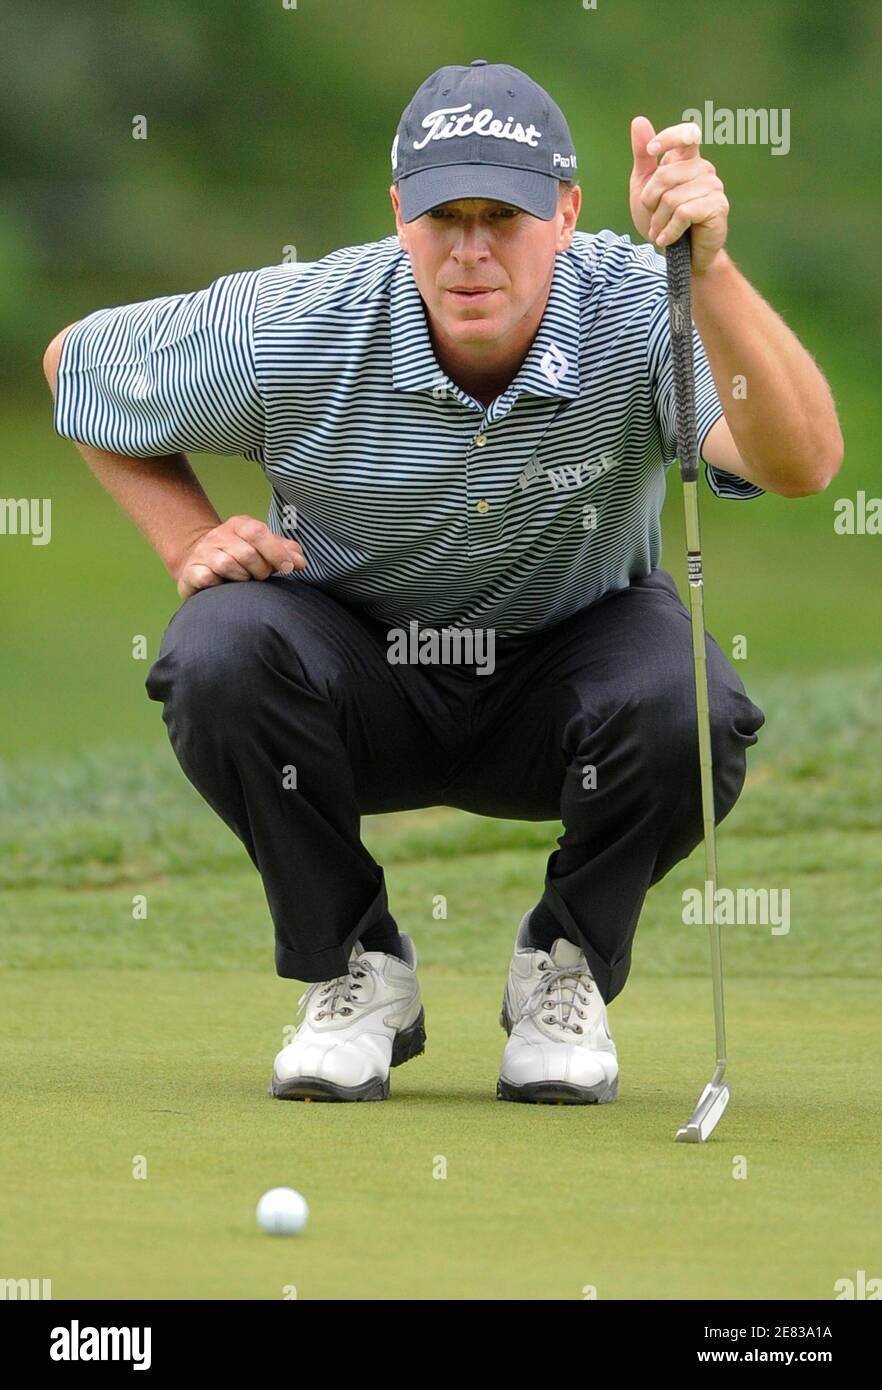 Steve Stricker of the U.S. lines up a putt on the seventh hole during the final round of the Northern Trust Open golf tournament in the Pacific Palisades area of Los Angeles February 22, 2009. REUTERS/Gus Ruelas (UNITED STATES) Stock Photo